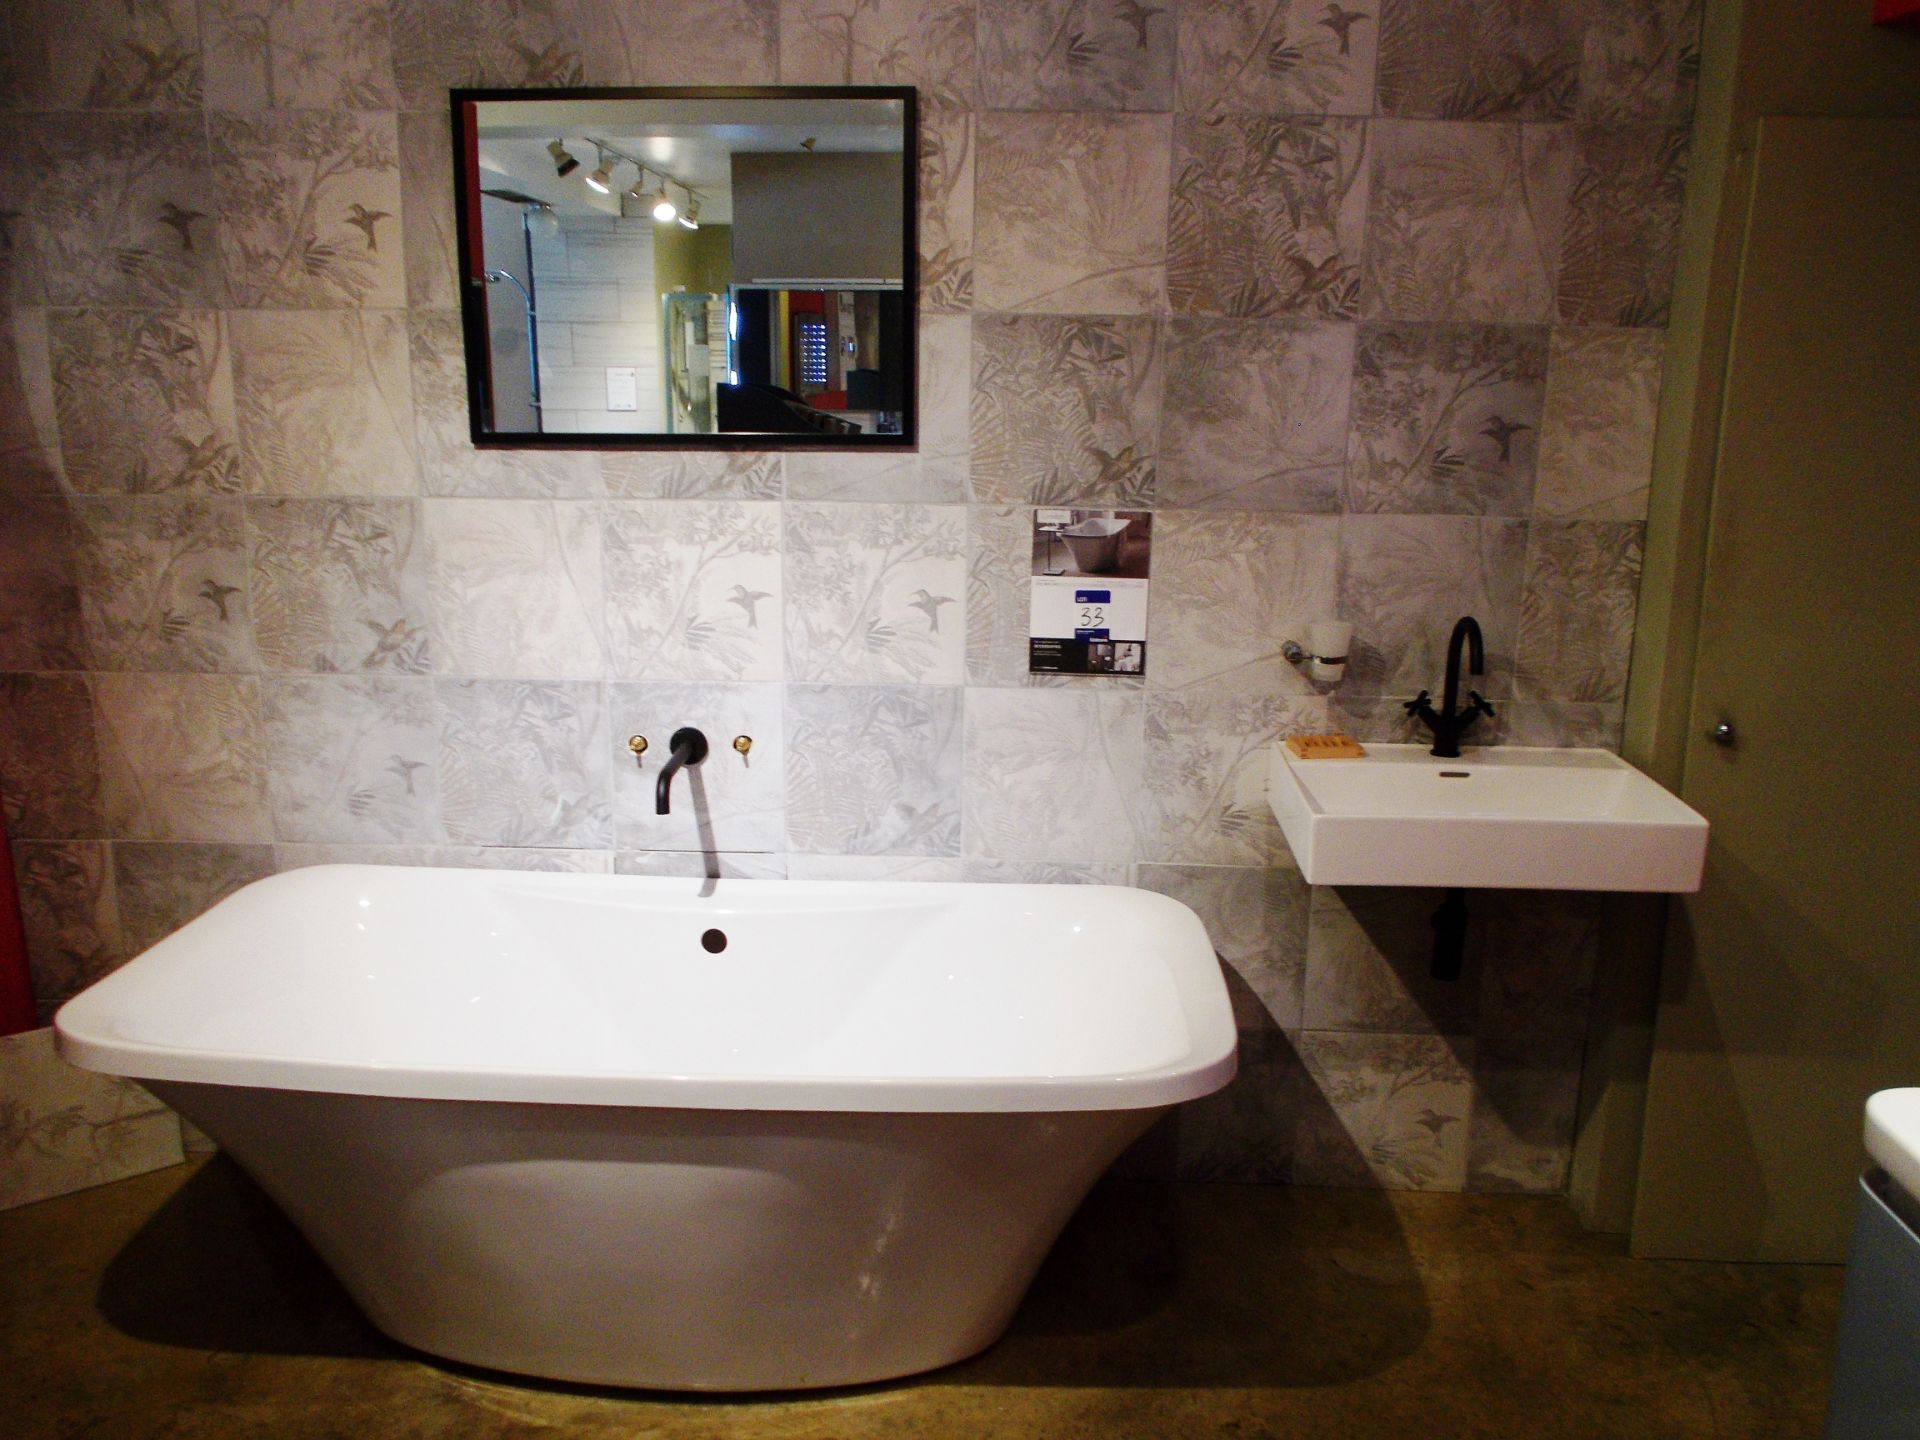 London bathroom suite, including bath with 180 litre capacity, and sink. RRP £2,000